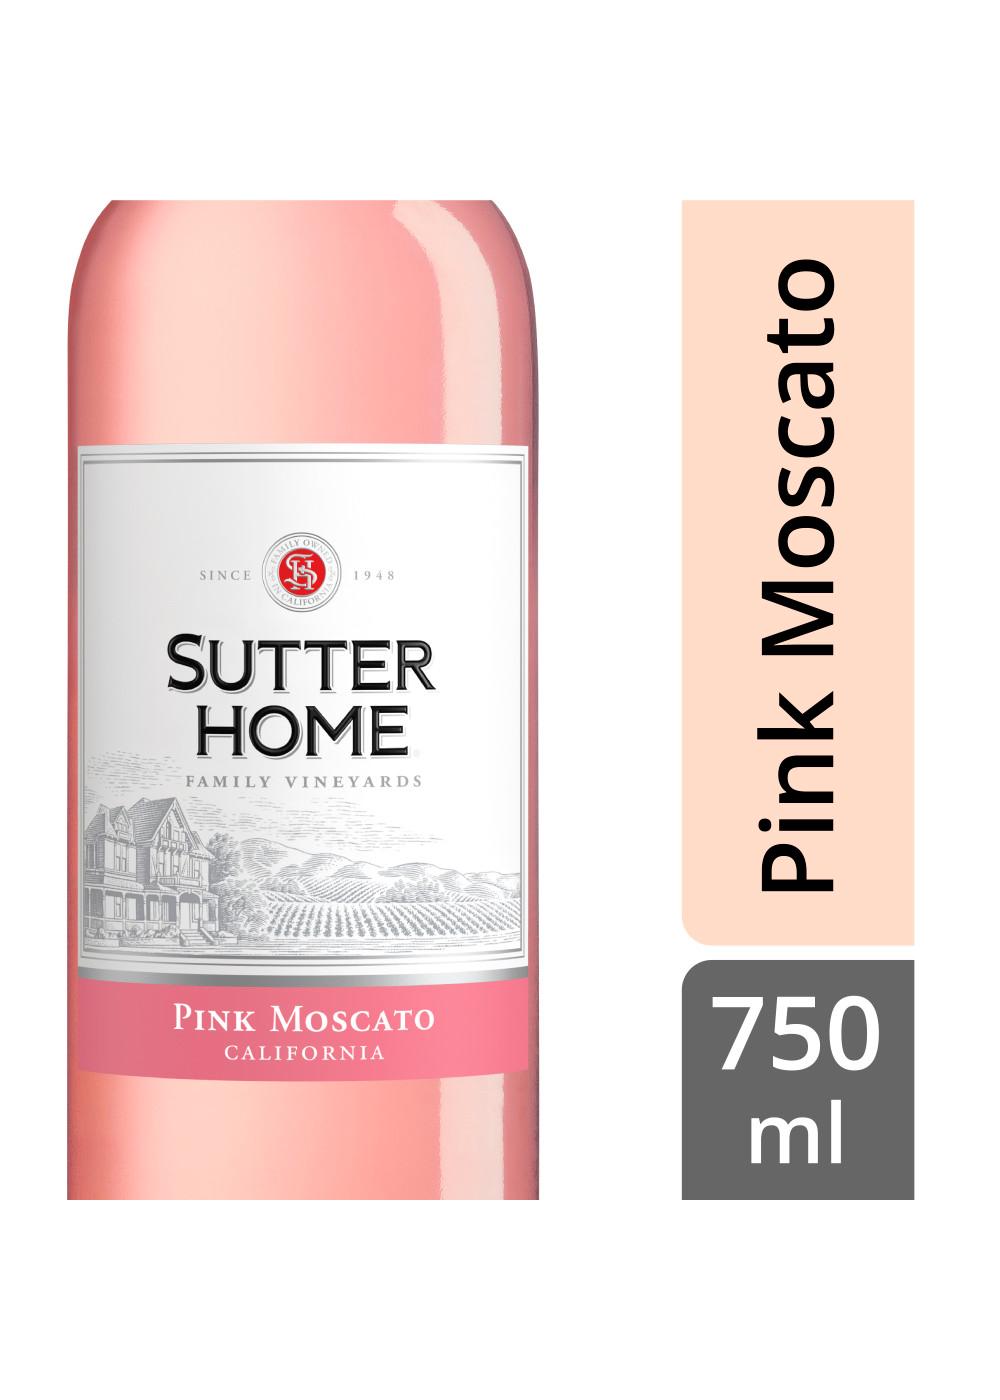 Sutter Home Family Vineyards Pink Moscato; image 4 of 4